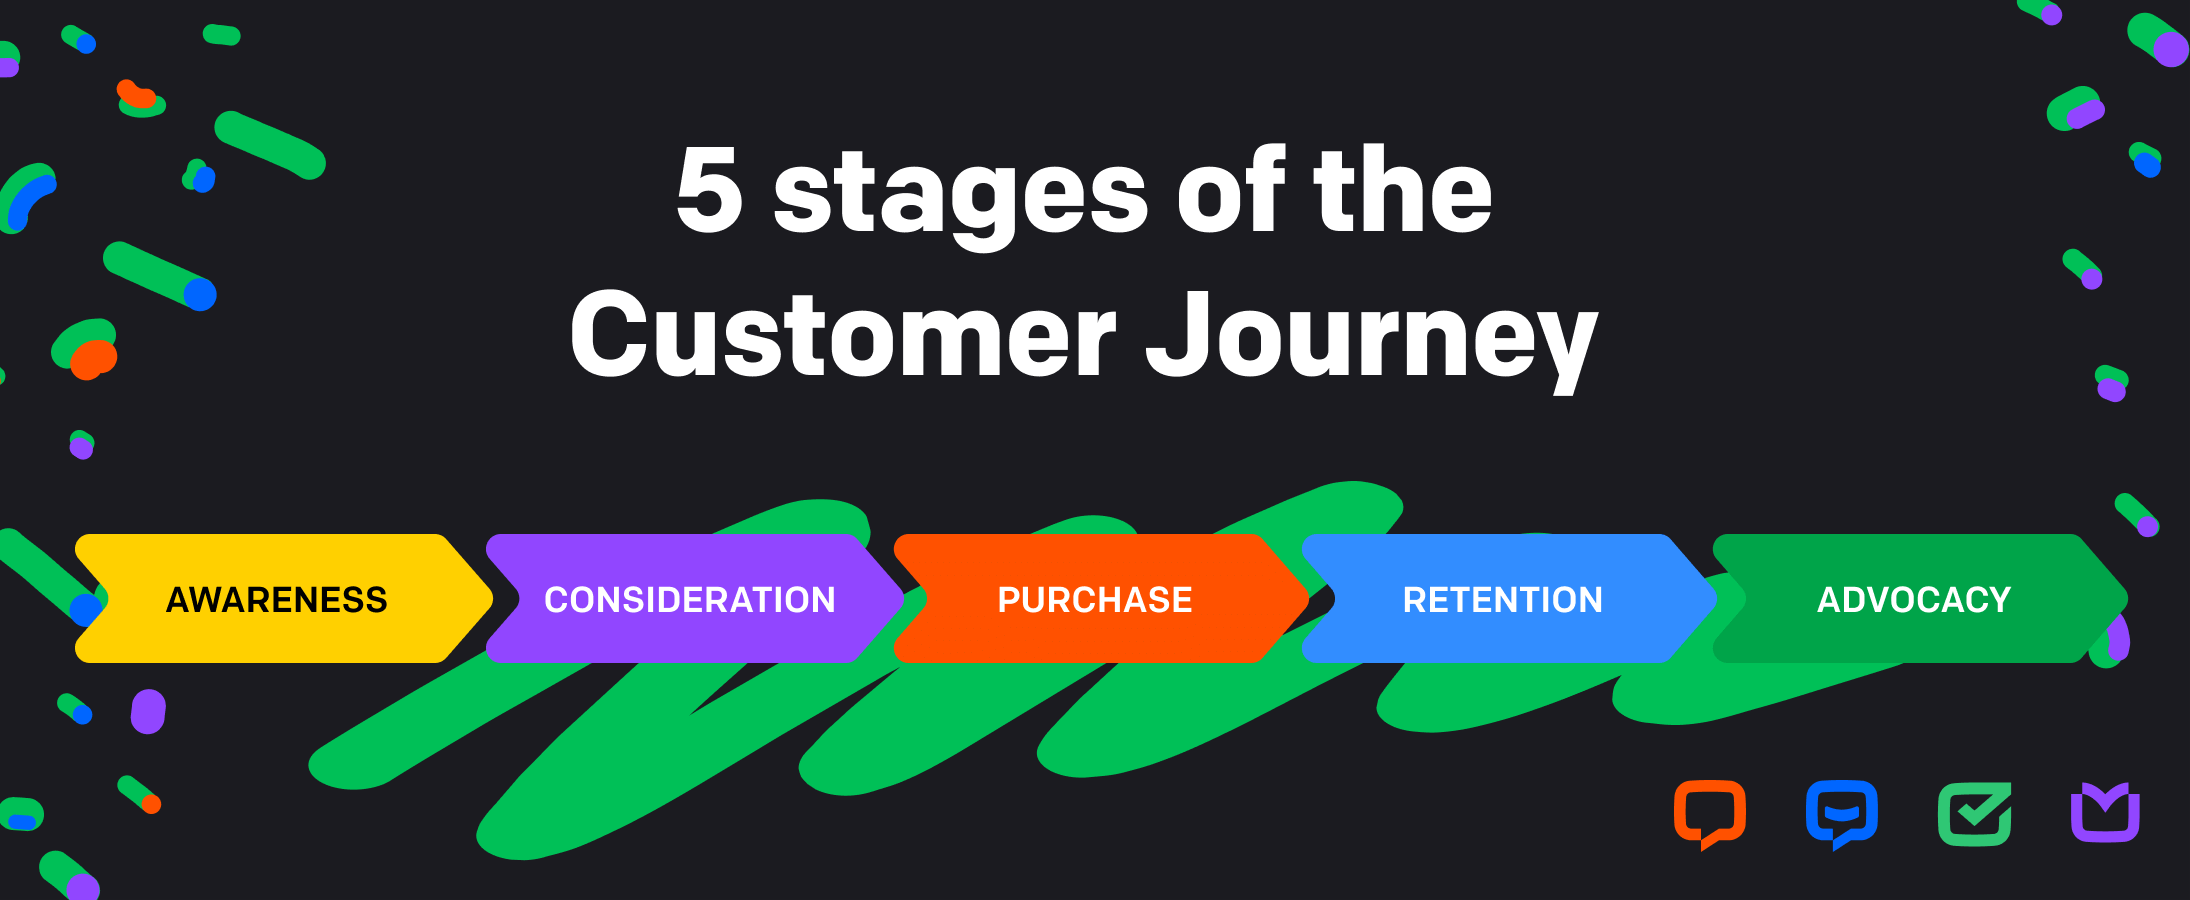 Five steps of the Customer Journey.